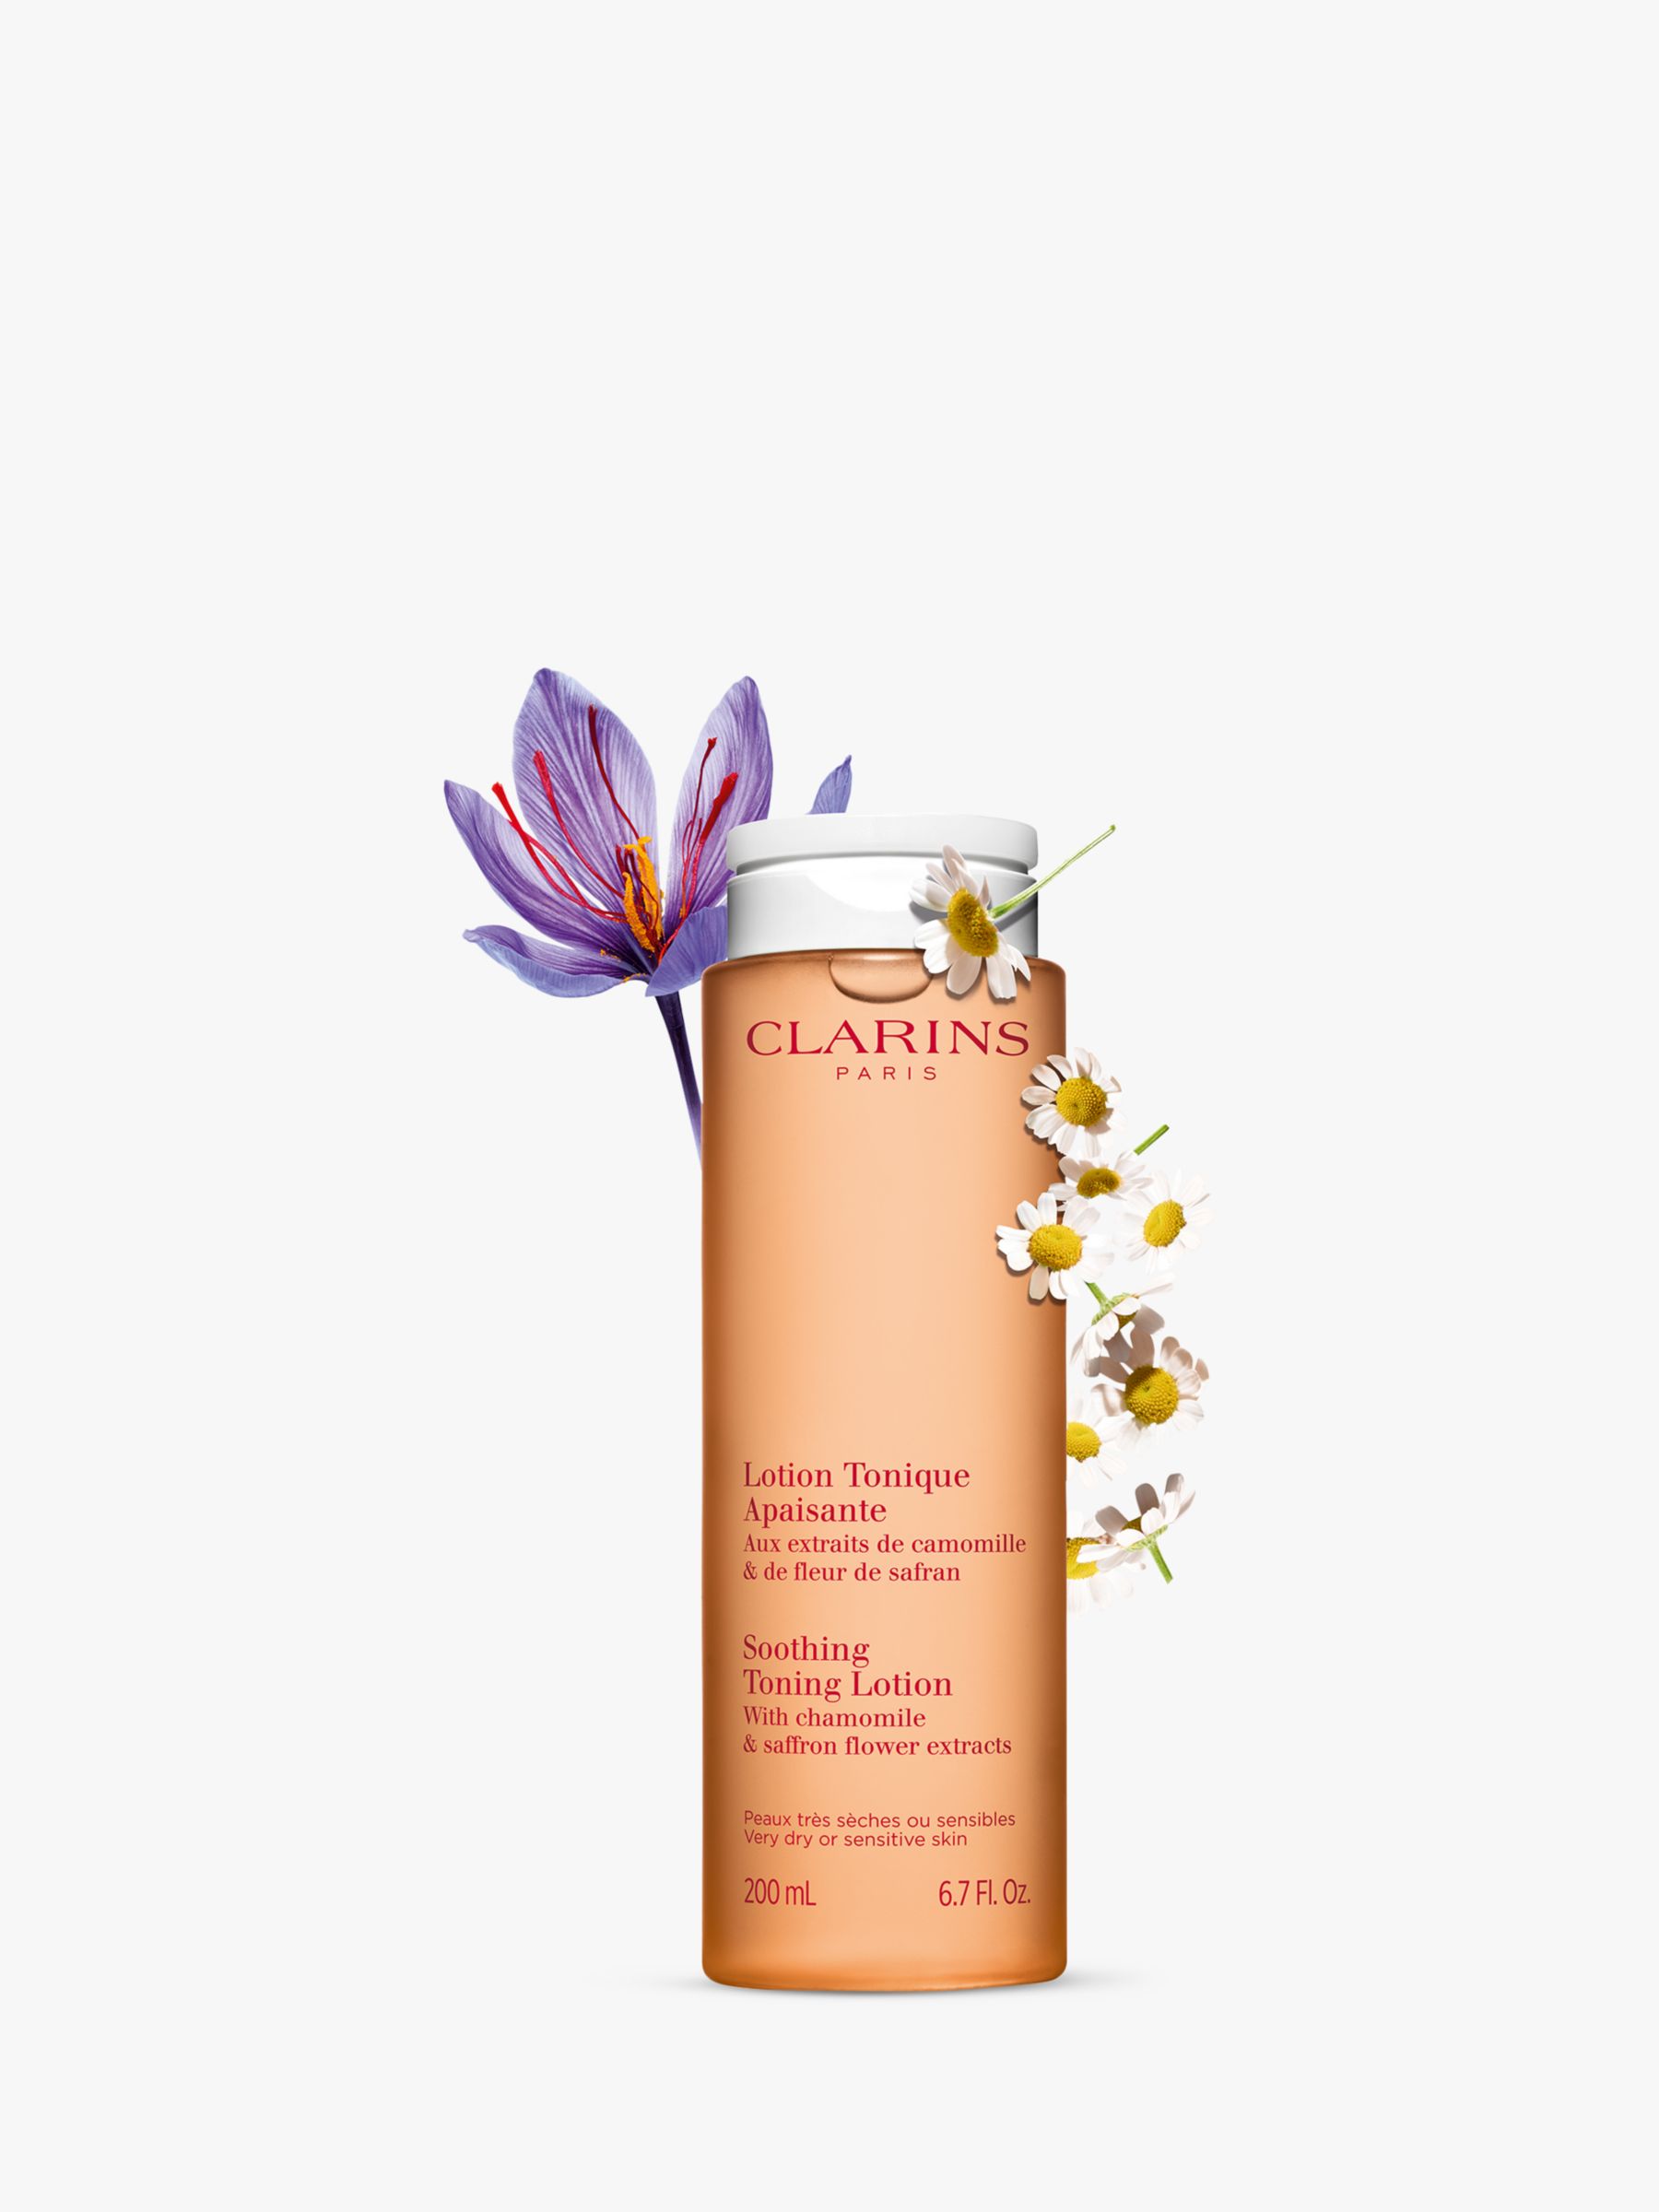 Clarins Soothing Toning Lotion, 200ml 2